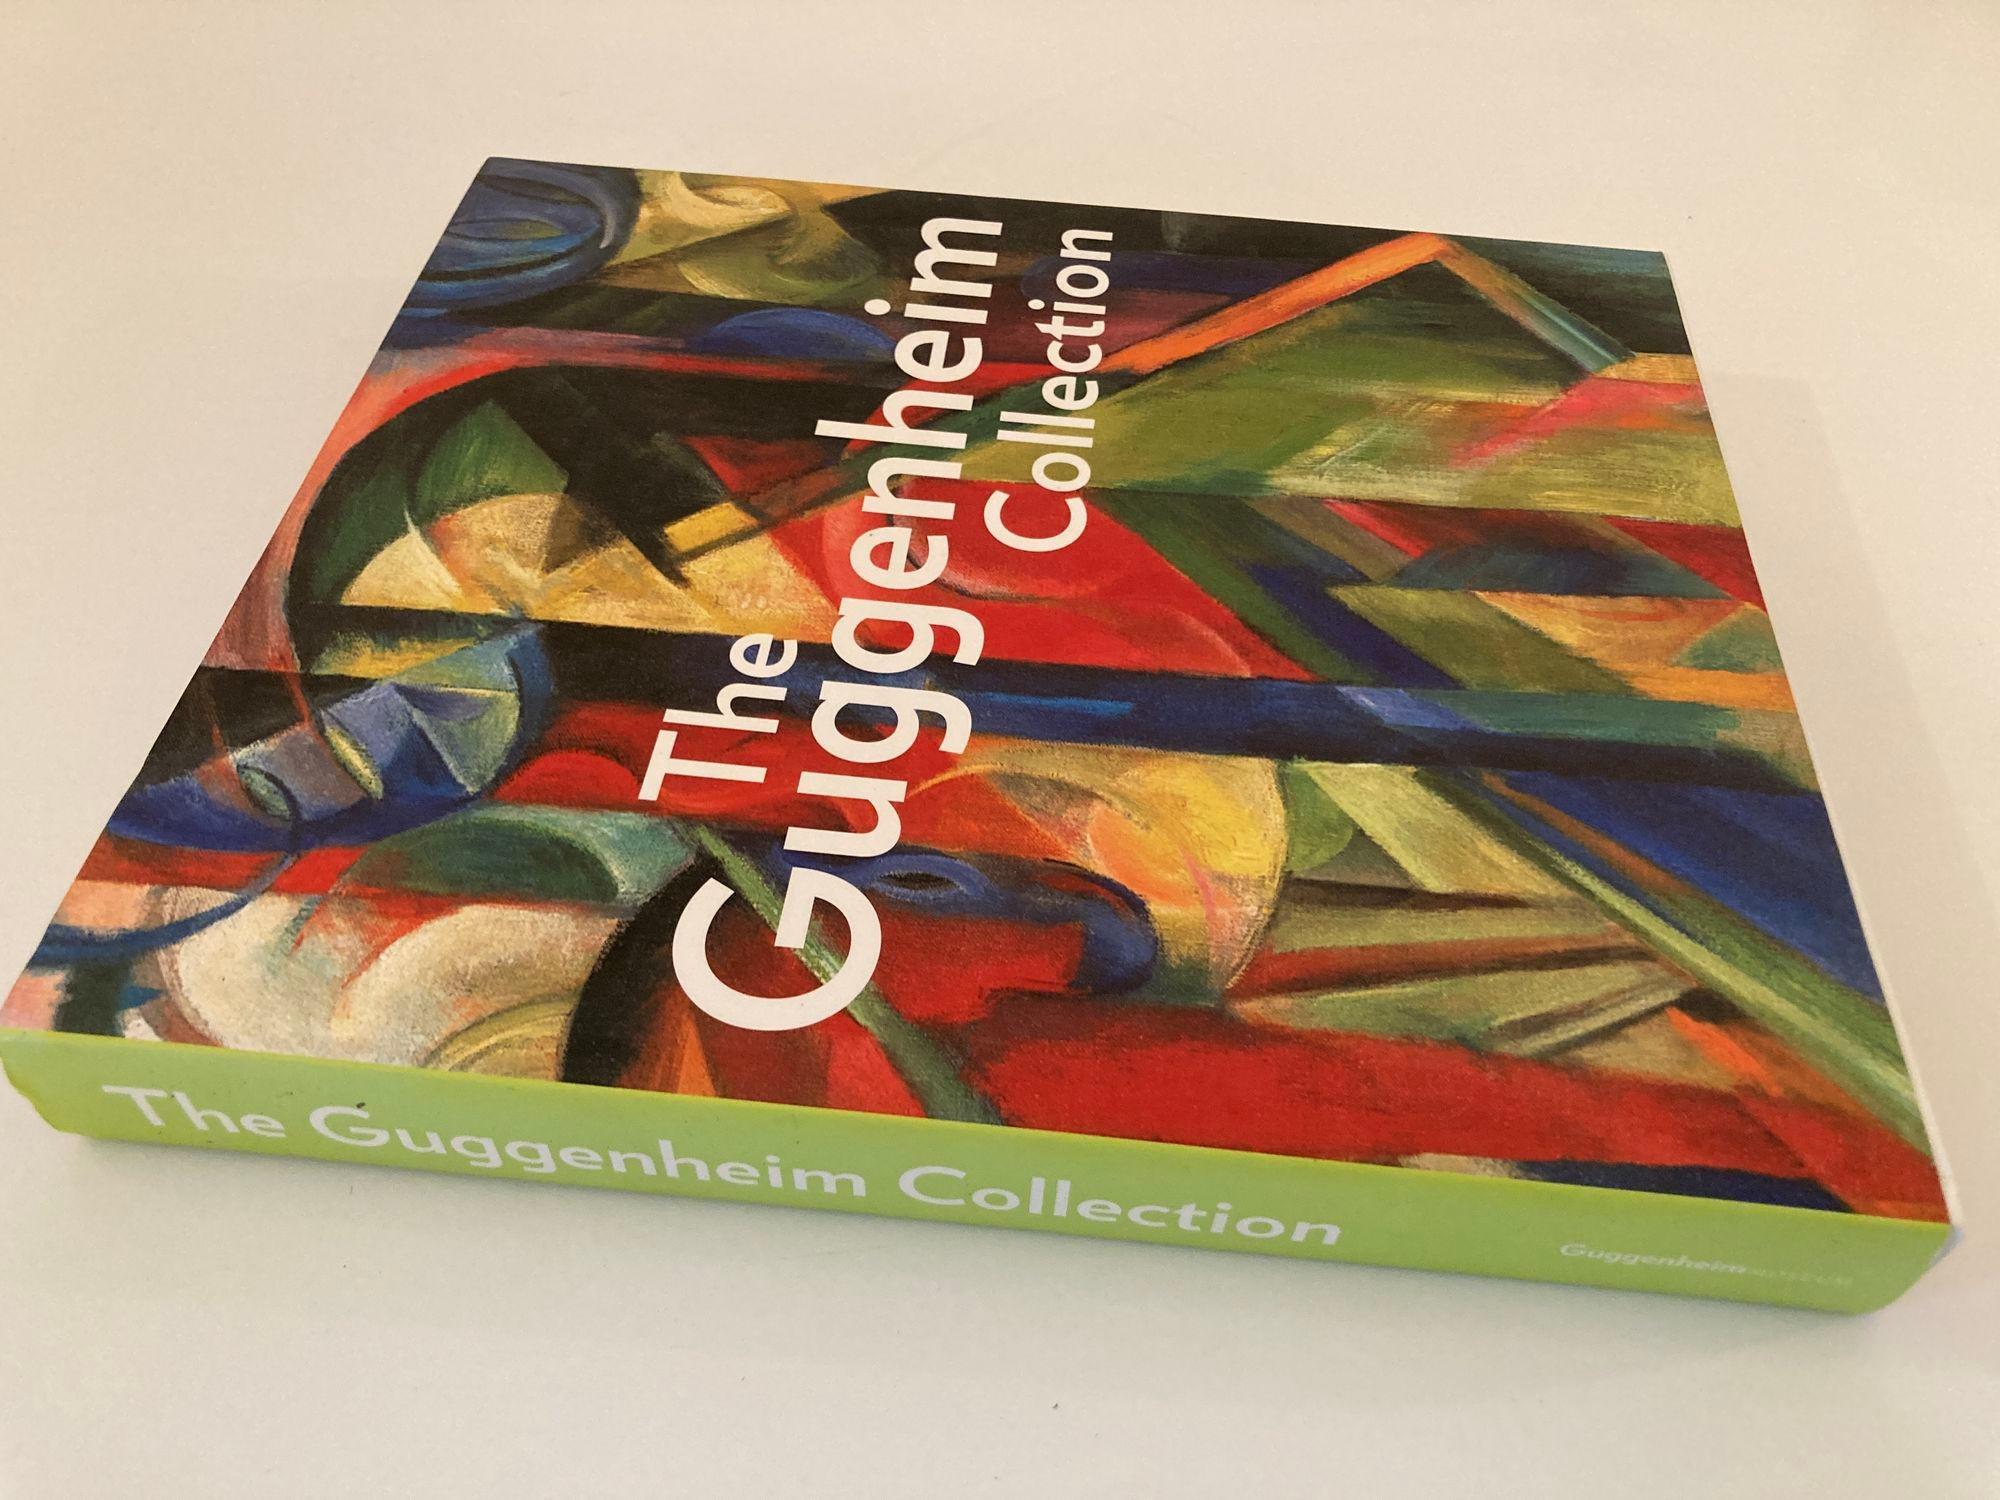 Modern The Guggenheim Collection by Anthony Calnek New York, 2006 For Sale